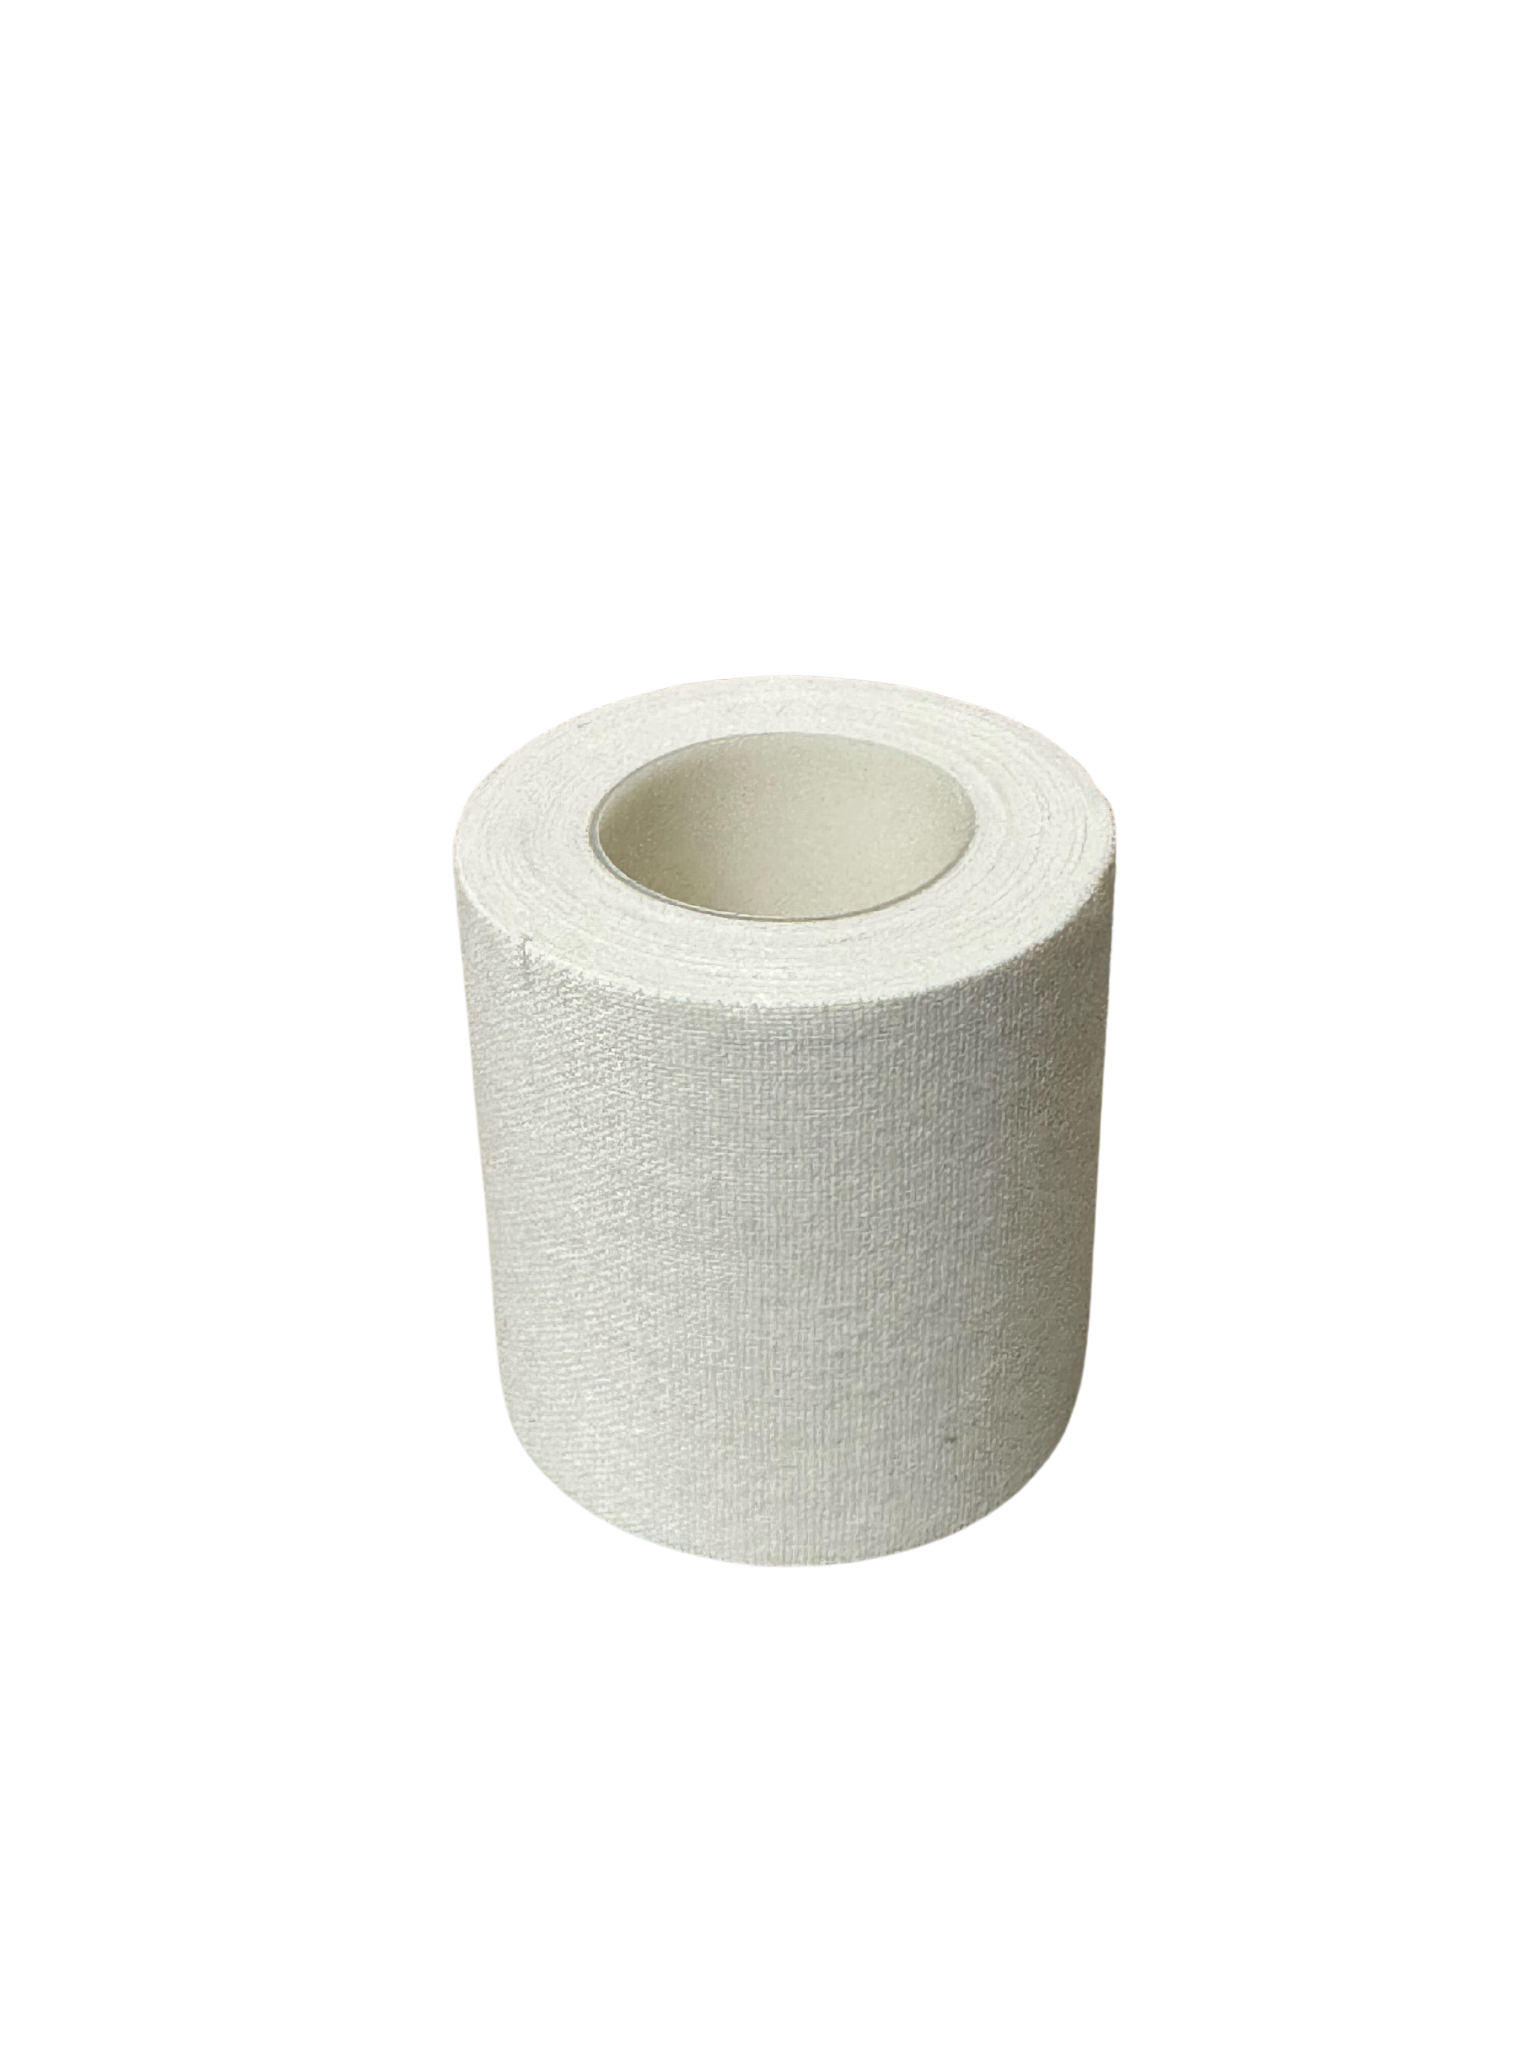 2 Inch Cloth Surgical Tape: Single Roll